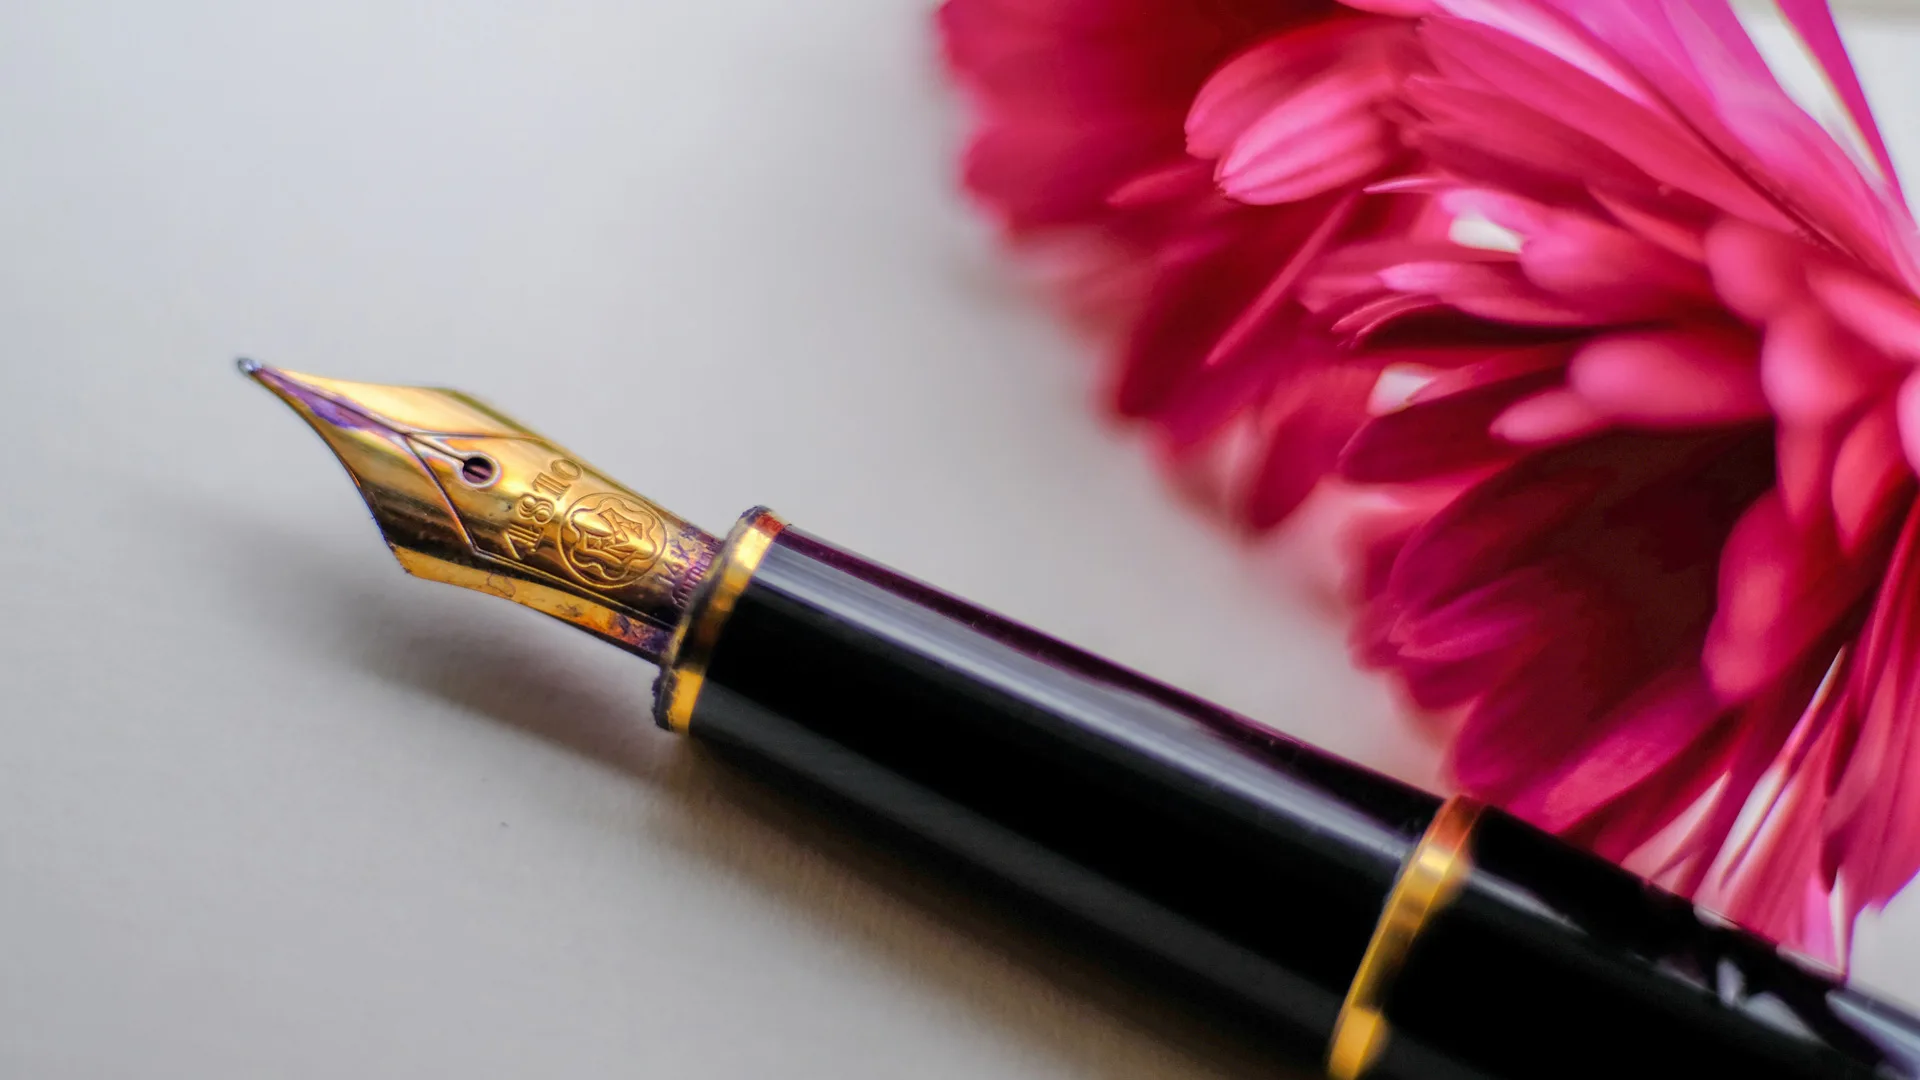 Photograph of a gold and black fountain pen next to pink flowers